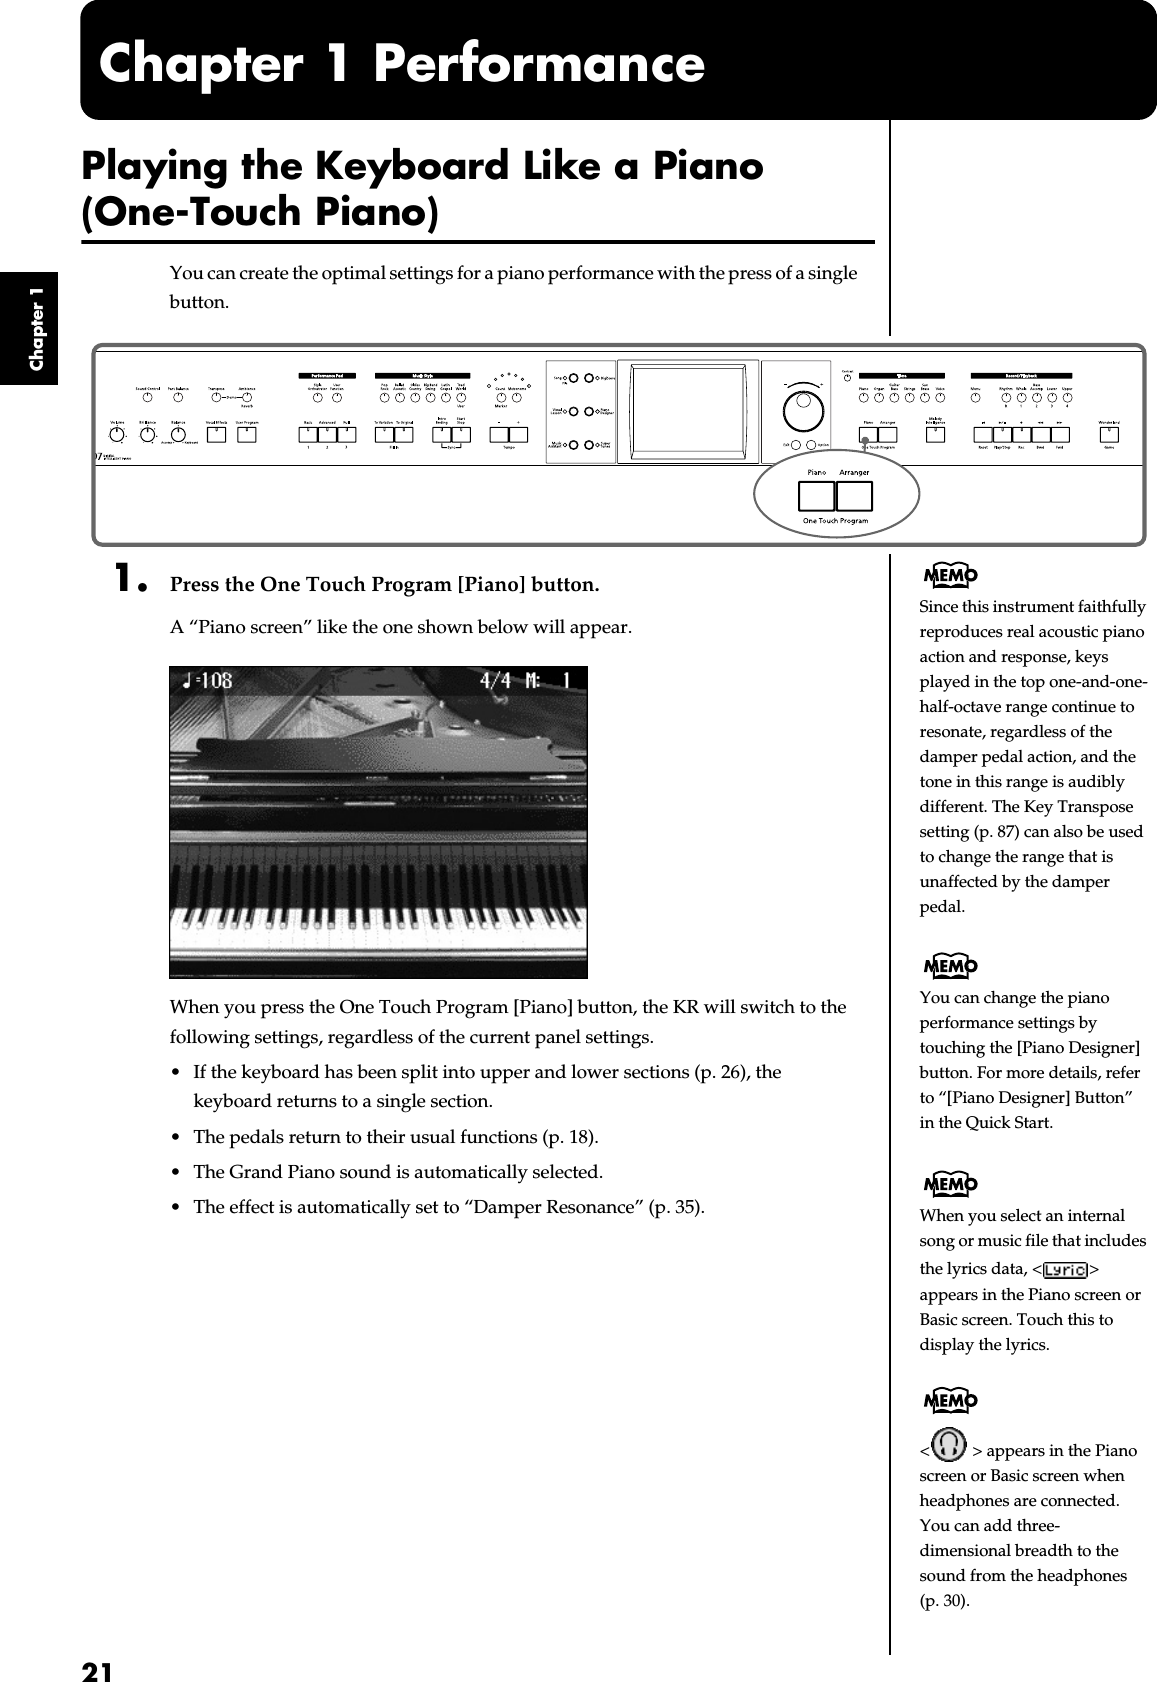  21 Chapter 1 Chapter 1 Performance Playing the Keyboard Like a Piano  (One-Touch Piano) You can create the optimal settings for a piano performance with the press of a single button. fig.panel1-1 1. Press the One Touch Program [Piano] button. A “Piano screen” like the one shown below will appear. fig.d-piano.eps_60 When you press the One Touch Program [Piano] button, the KR will switch to the following settings, regardless of the current panel settings.• If the keyboard has been split into upper and lower sections (p. 26), the keyboard returns to a single section.• The pedals return to their usual functions (p. 18).• The Grand Piano sound is automatically selected.• The effect is automatically set to “Damper Resonance” (p. 35).You can change the piano performance settings by touching the [Piano Designer] button. For more details, refer to “[Piano Designer] Button” in the Quick Start.When you select an internal song or music file that includes the lyrics data, &lt; &gt; appears in the Piano screen or Basic screen. Touch this to display the lyrics.&lt;  &gt; appears in the Piano screen or Basic screen when headphones are connected.You can add three-dimensional breadth to the sound from the headphones (p. 30). Since this instrument faithfully reproduces real acoustic piano action and response, keys played in the top one-and-one-half-octave range continue to resonate, regardless of the damper pedal action, and the tone in this range is audibly different. The Key Transpose setting (p. 87) can also be used to change the range that is unaffected by the damper pedal.